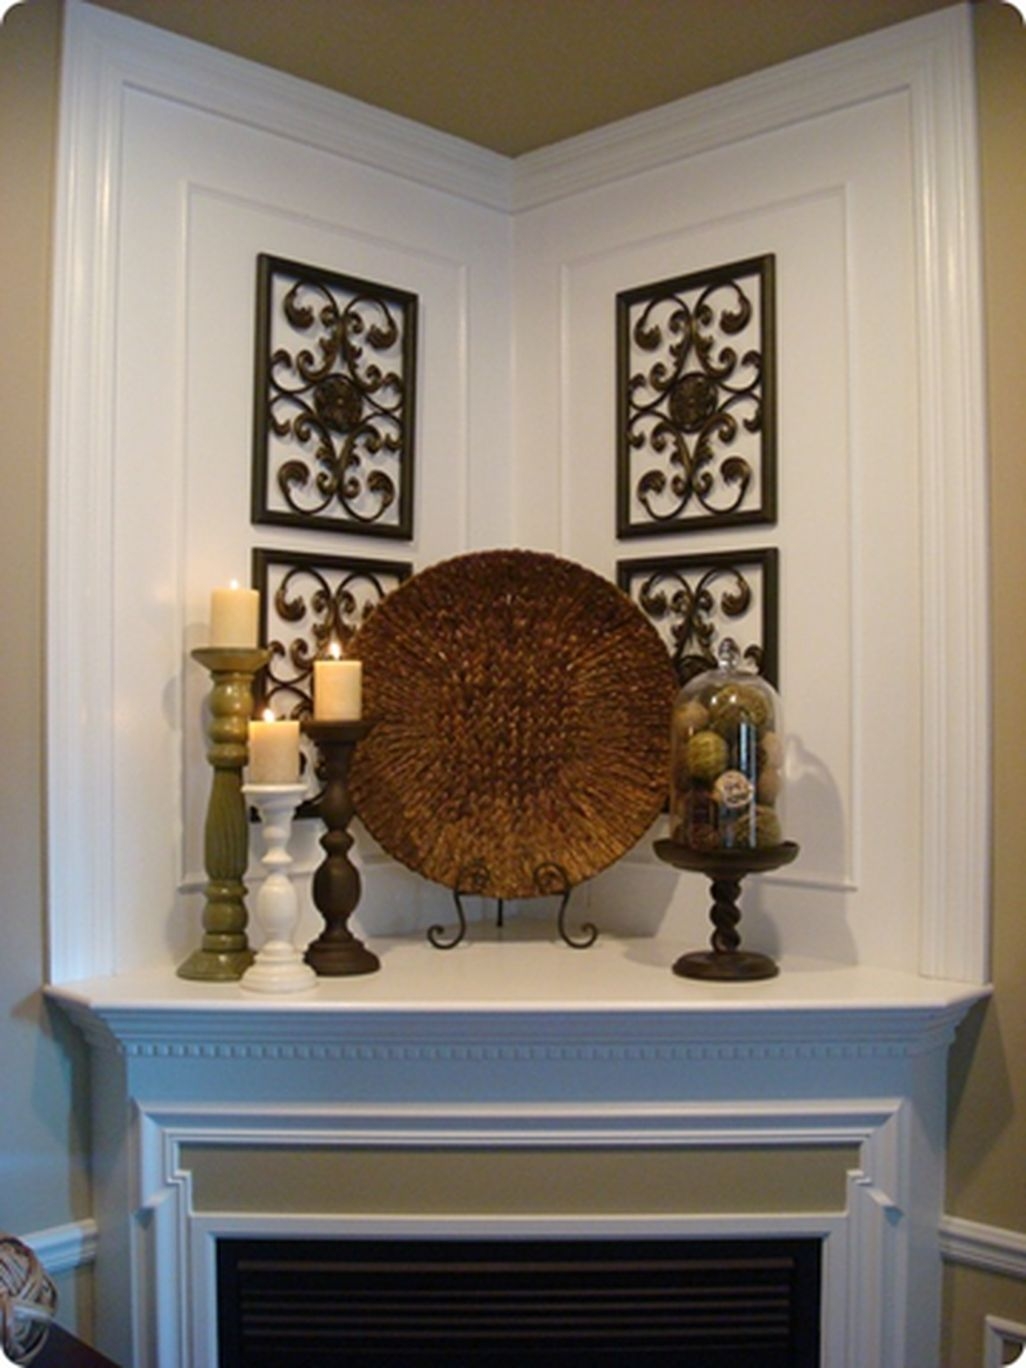 Large decorative plates for display